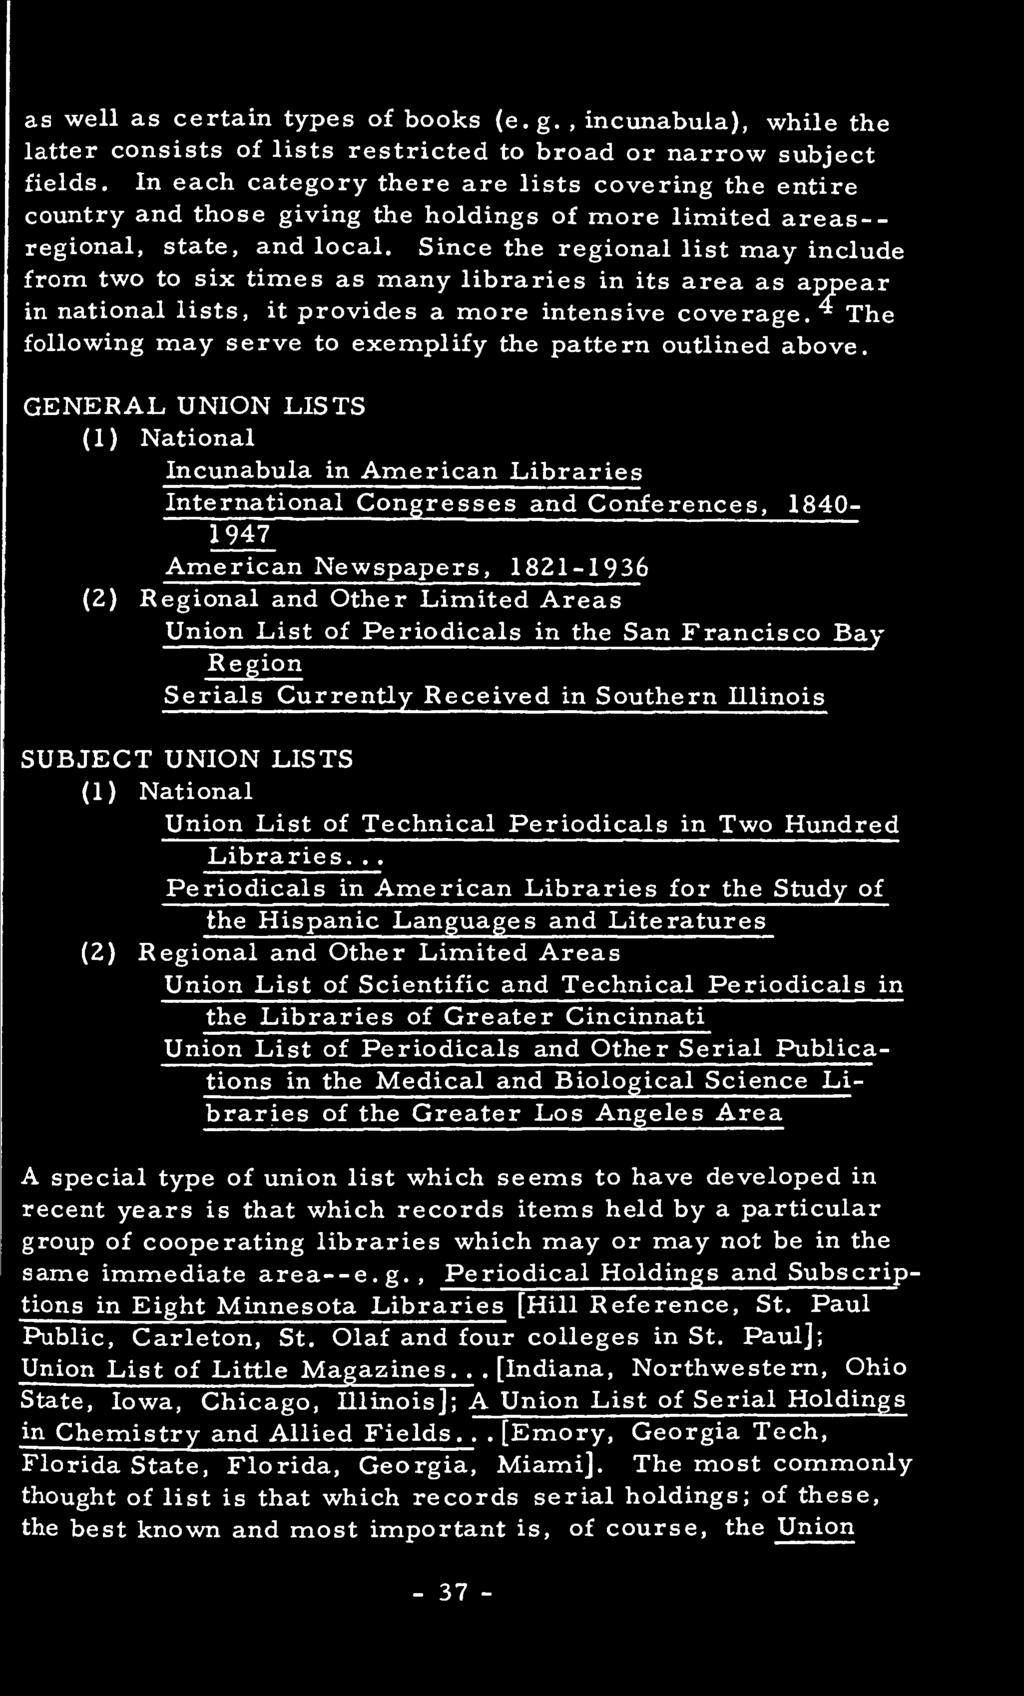 GENERAL UNION LISTS (1) National Incunabula in American Libraries International Congresses and Conferences, 1840-1947 American Newspapers, 1821-1936 (2) Regional and Other Limited Areas Union List of